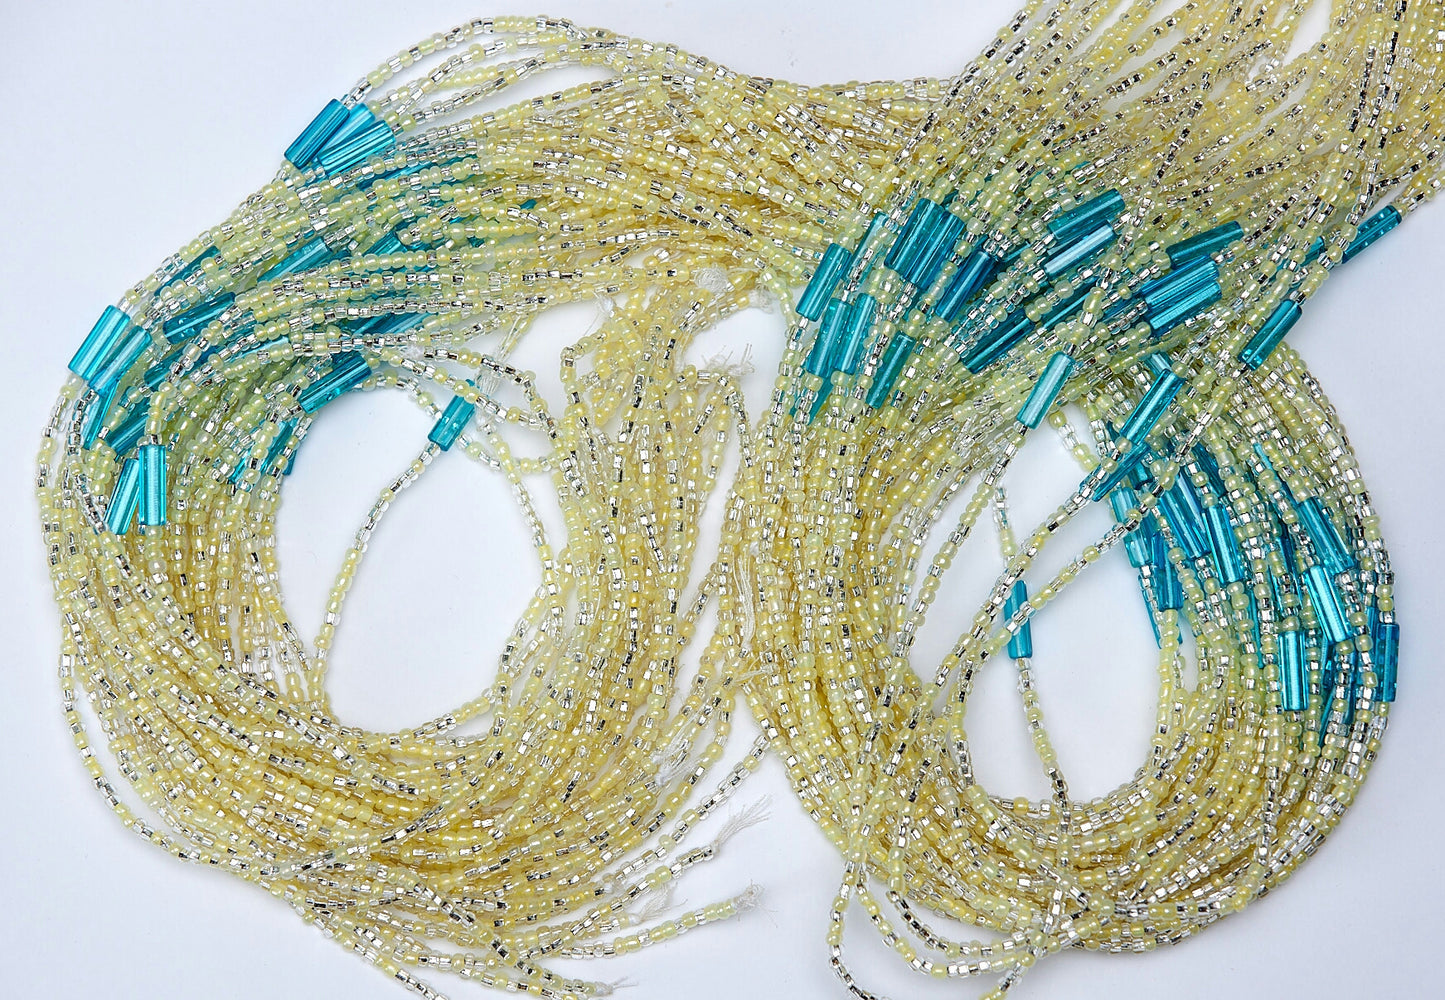 44 Inches Yellow And Silver Beads With Blue Pebble Bars Tie on Waist Beads